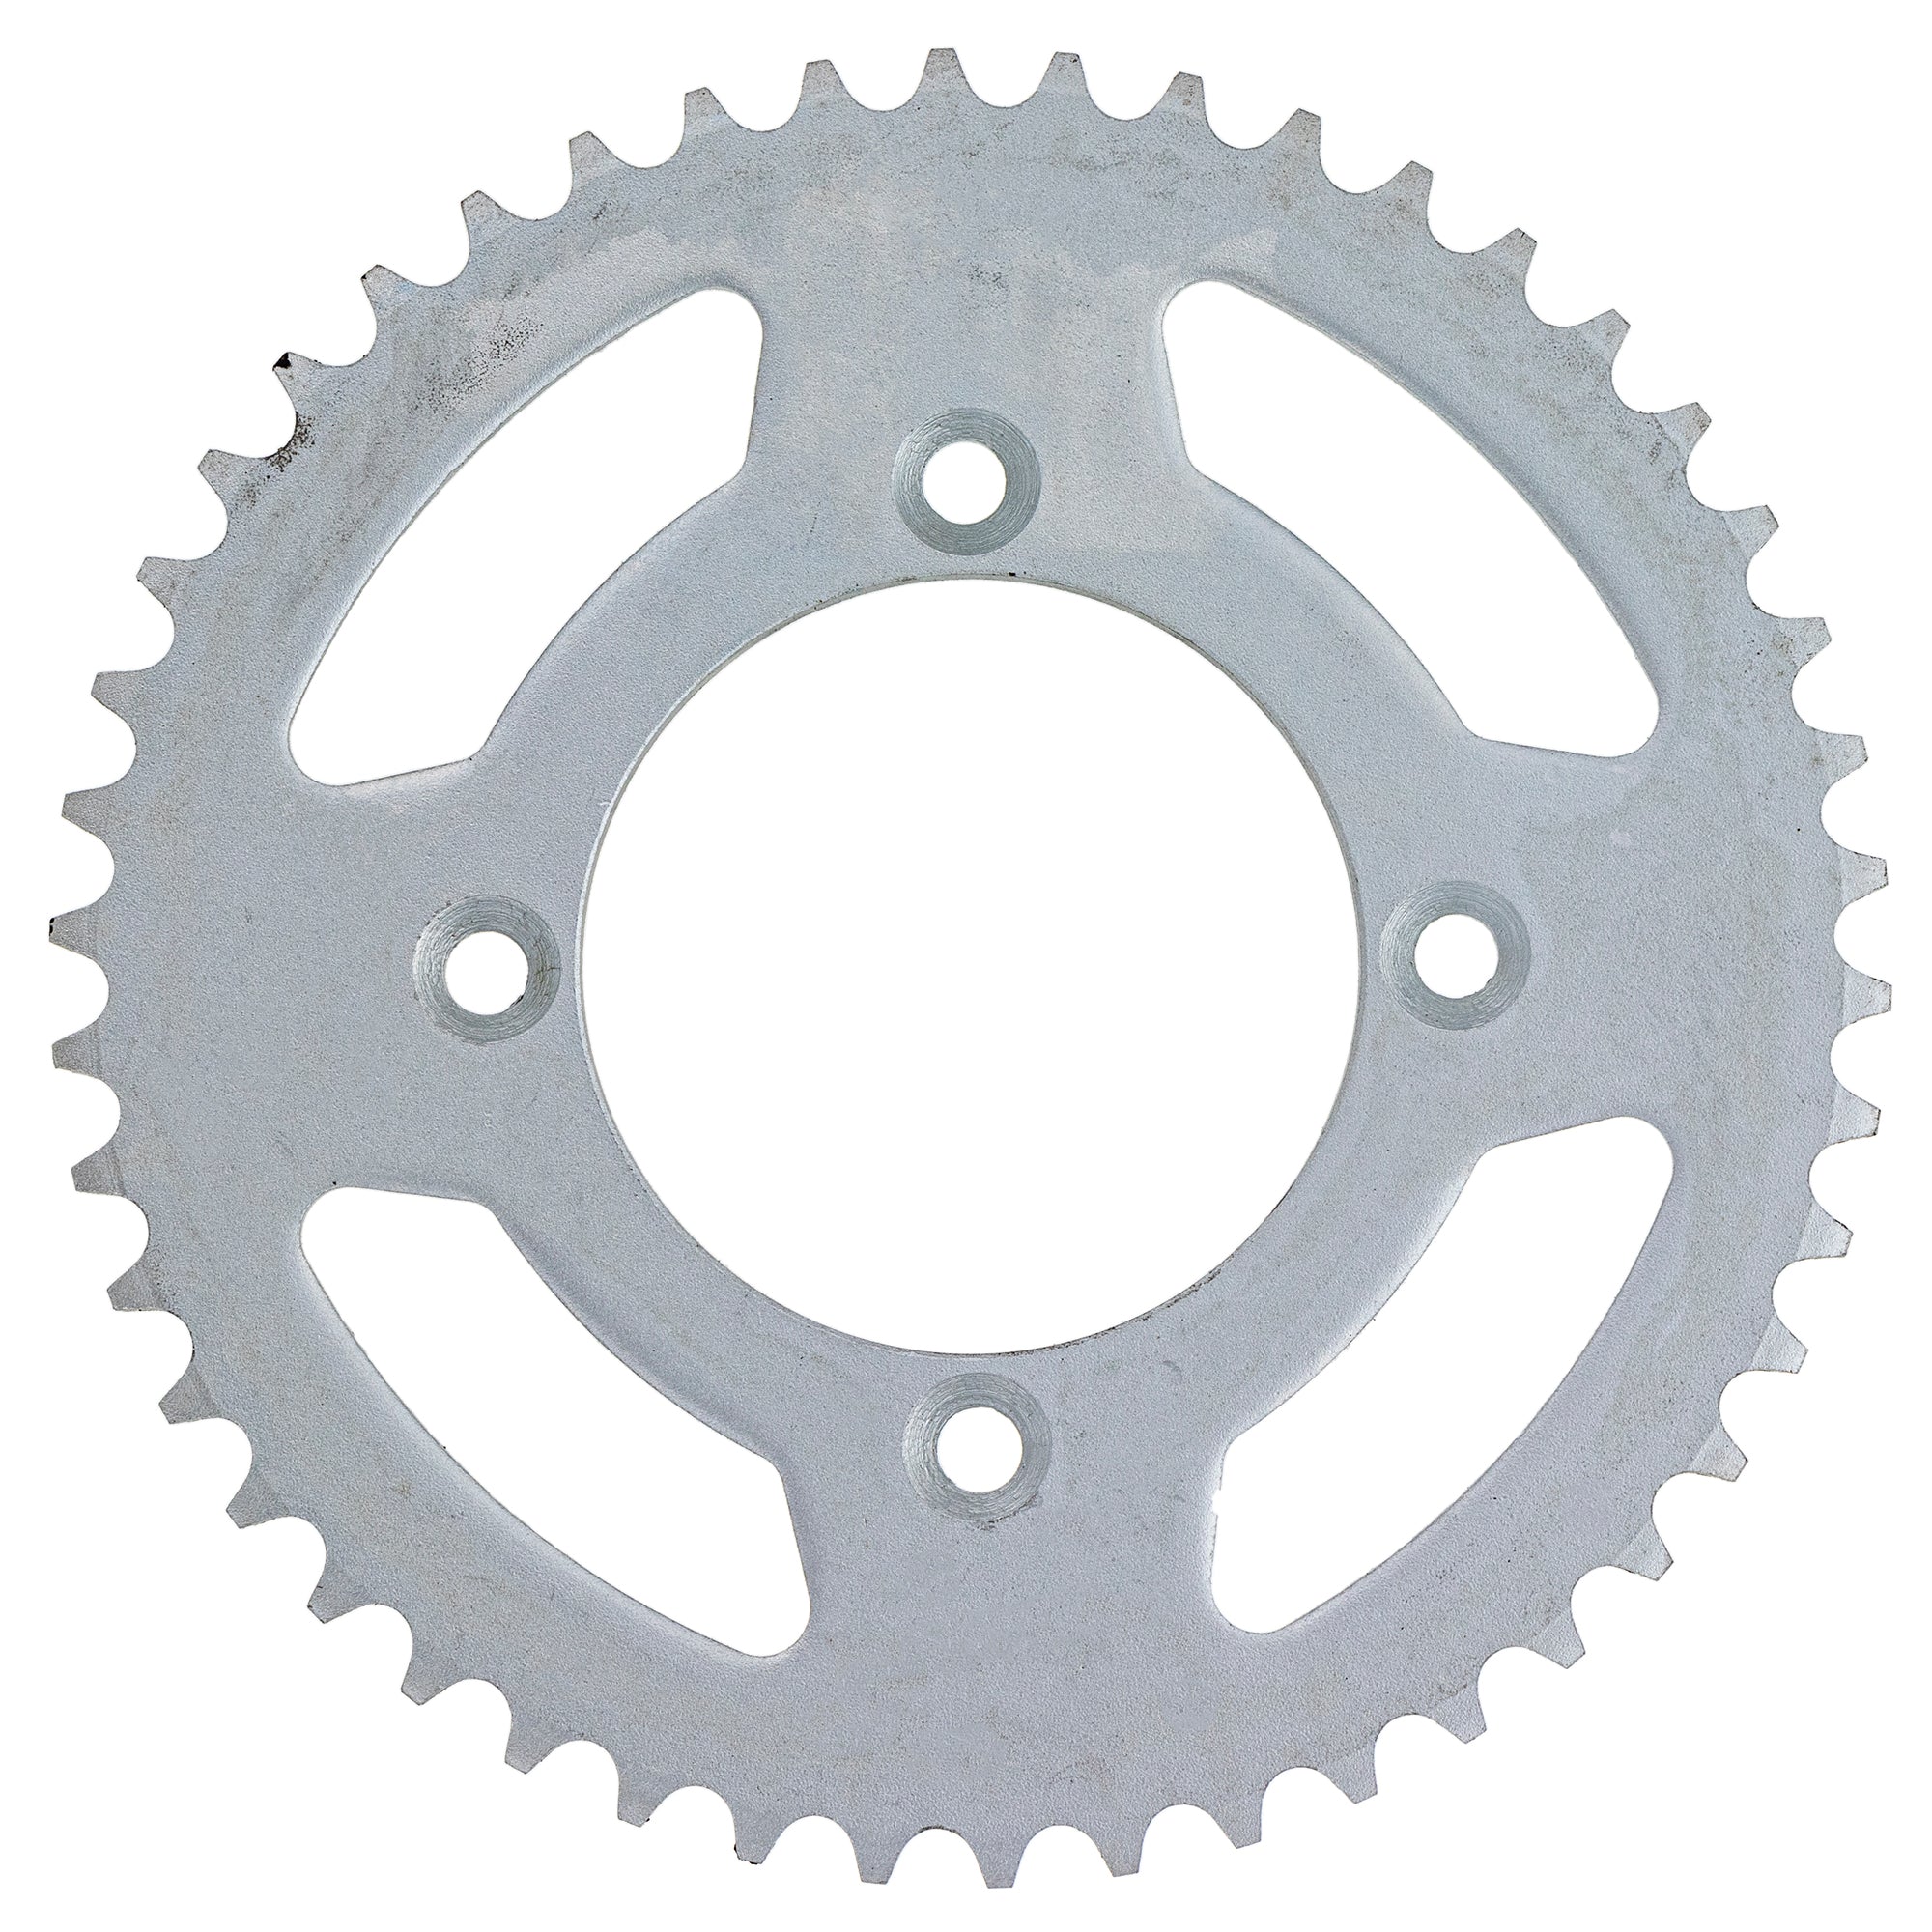 420 Pitch Front 14T Rear 46T Drive Sprocket Kit for Honda XR80R CRF80F